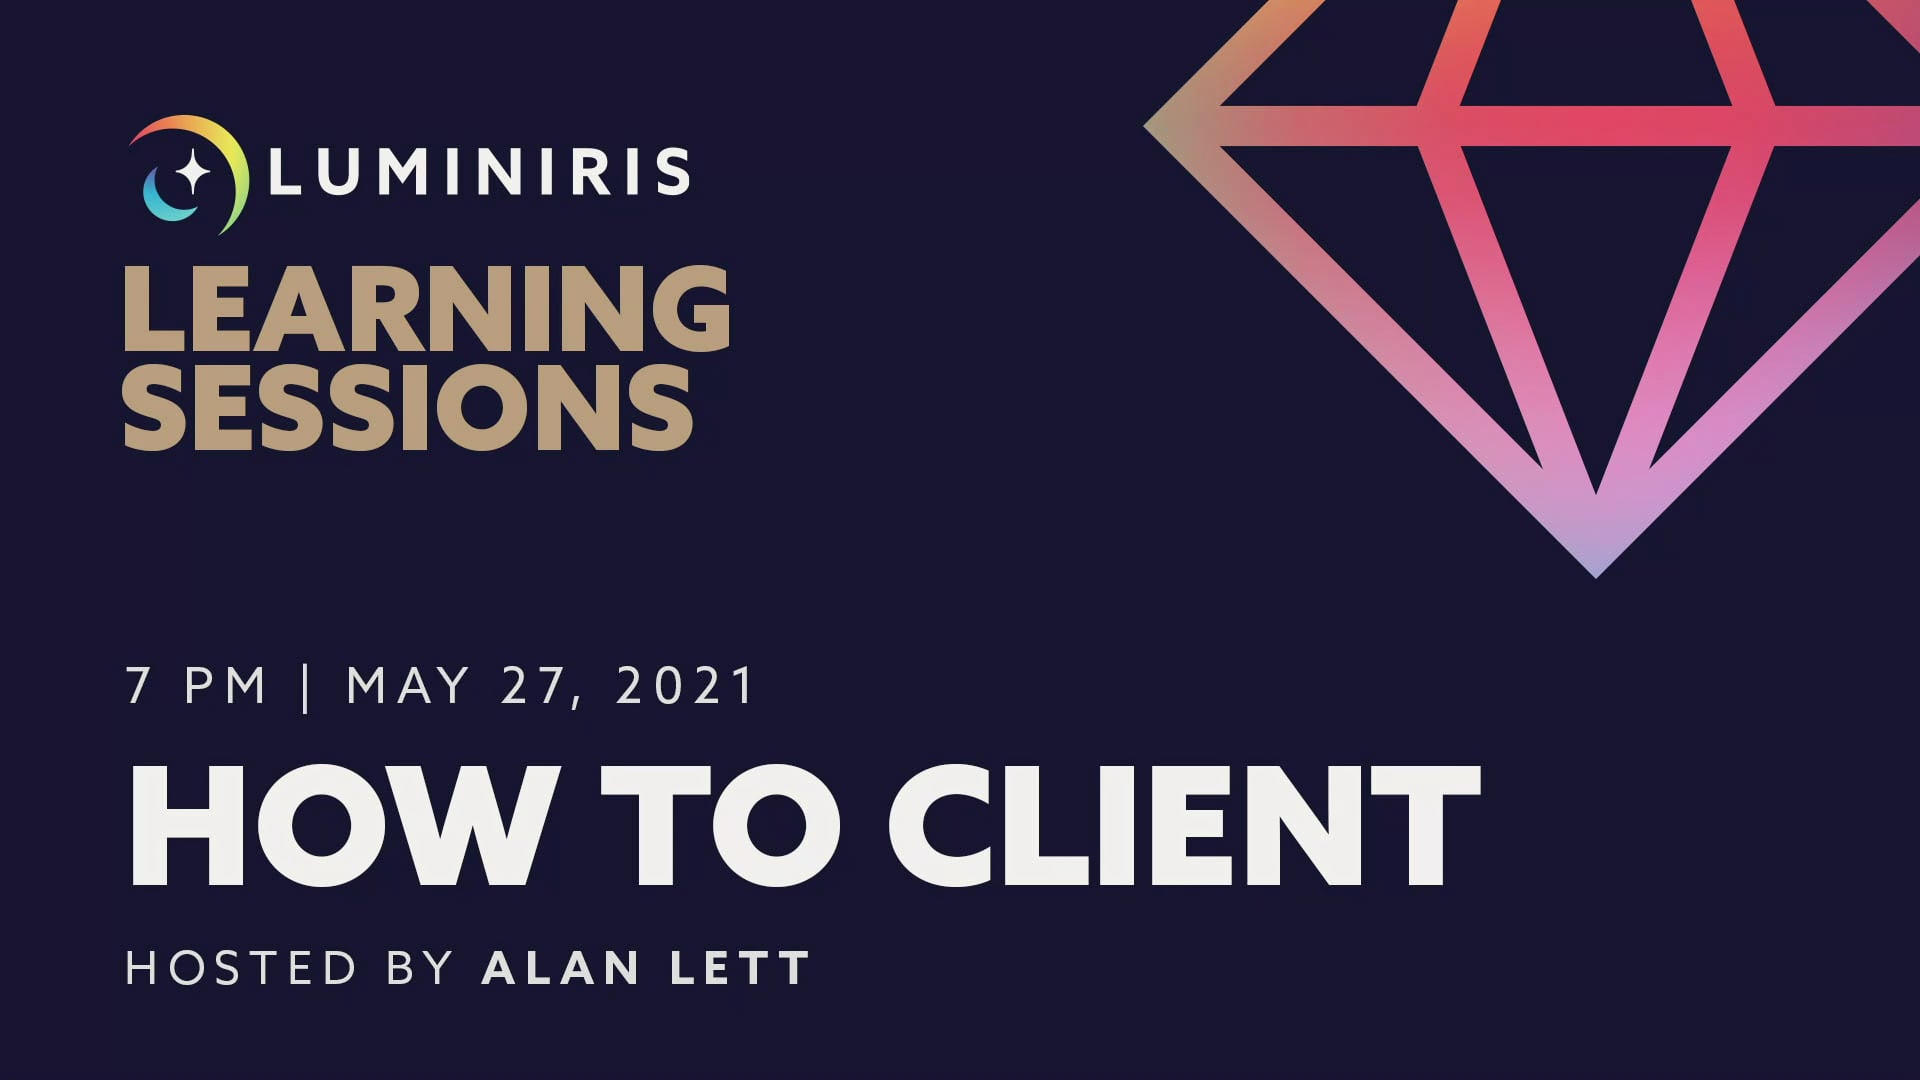 Luminiris Learning Session: How To Client